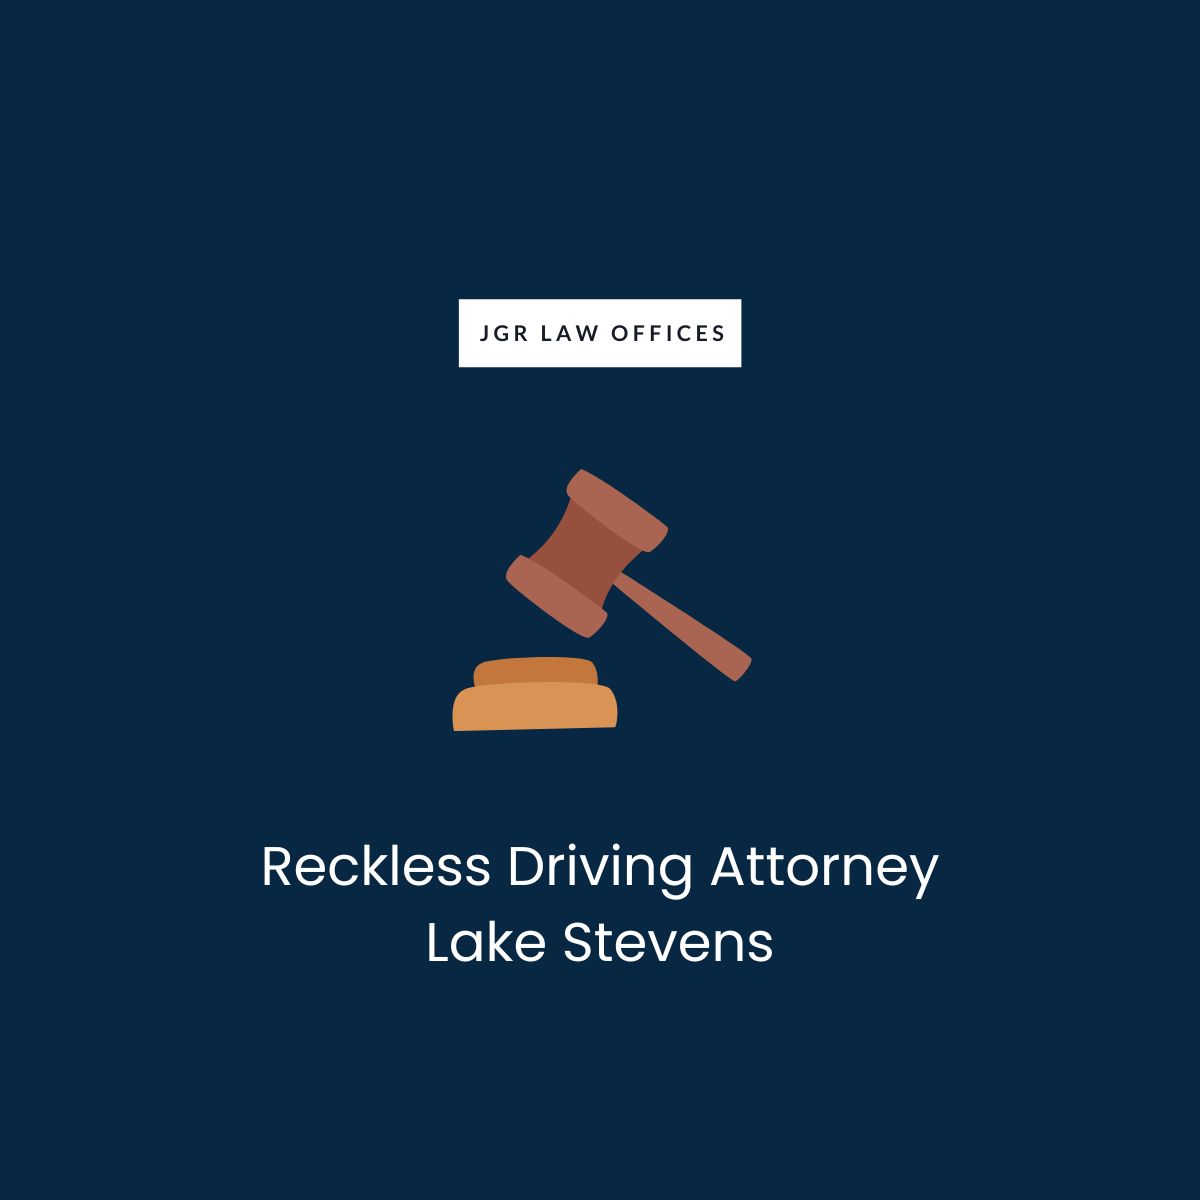 Reckless Driving Attorney Lake Stevens